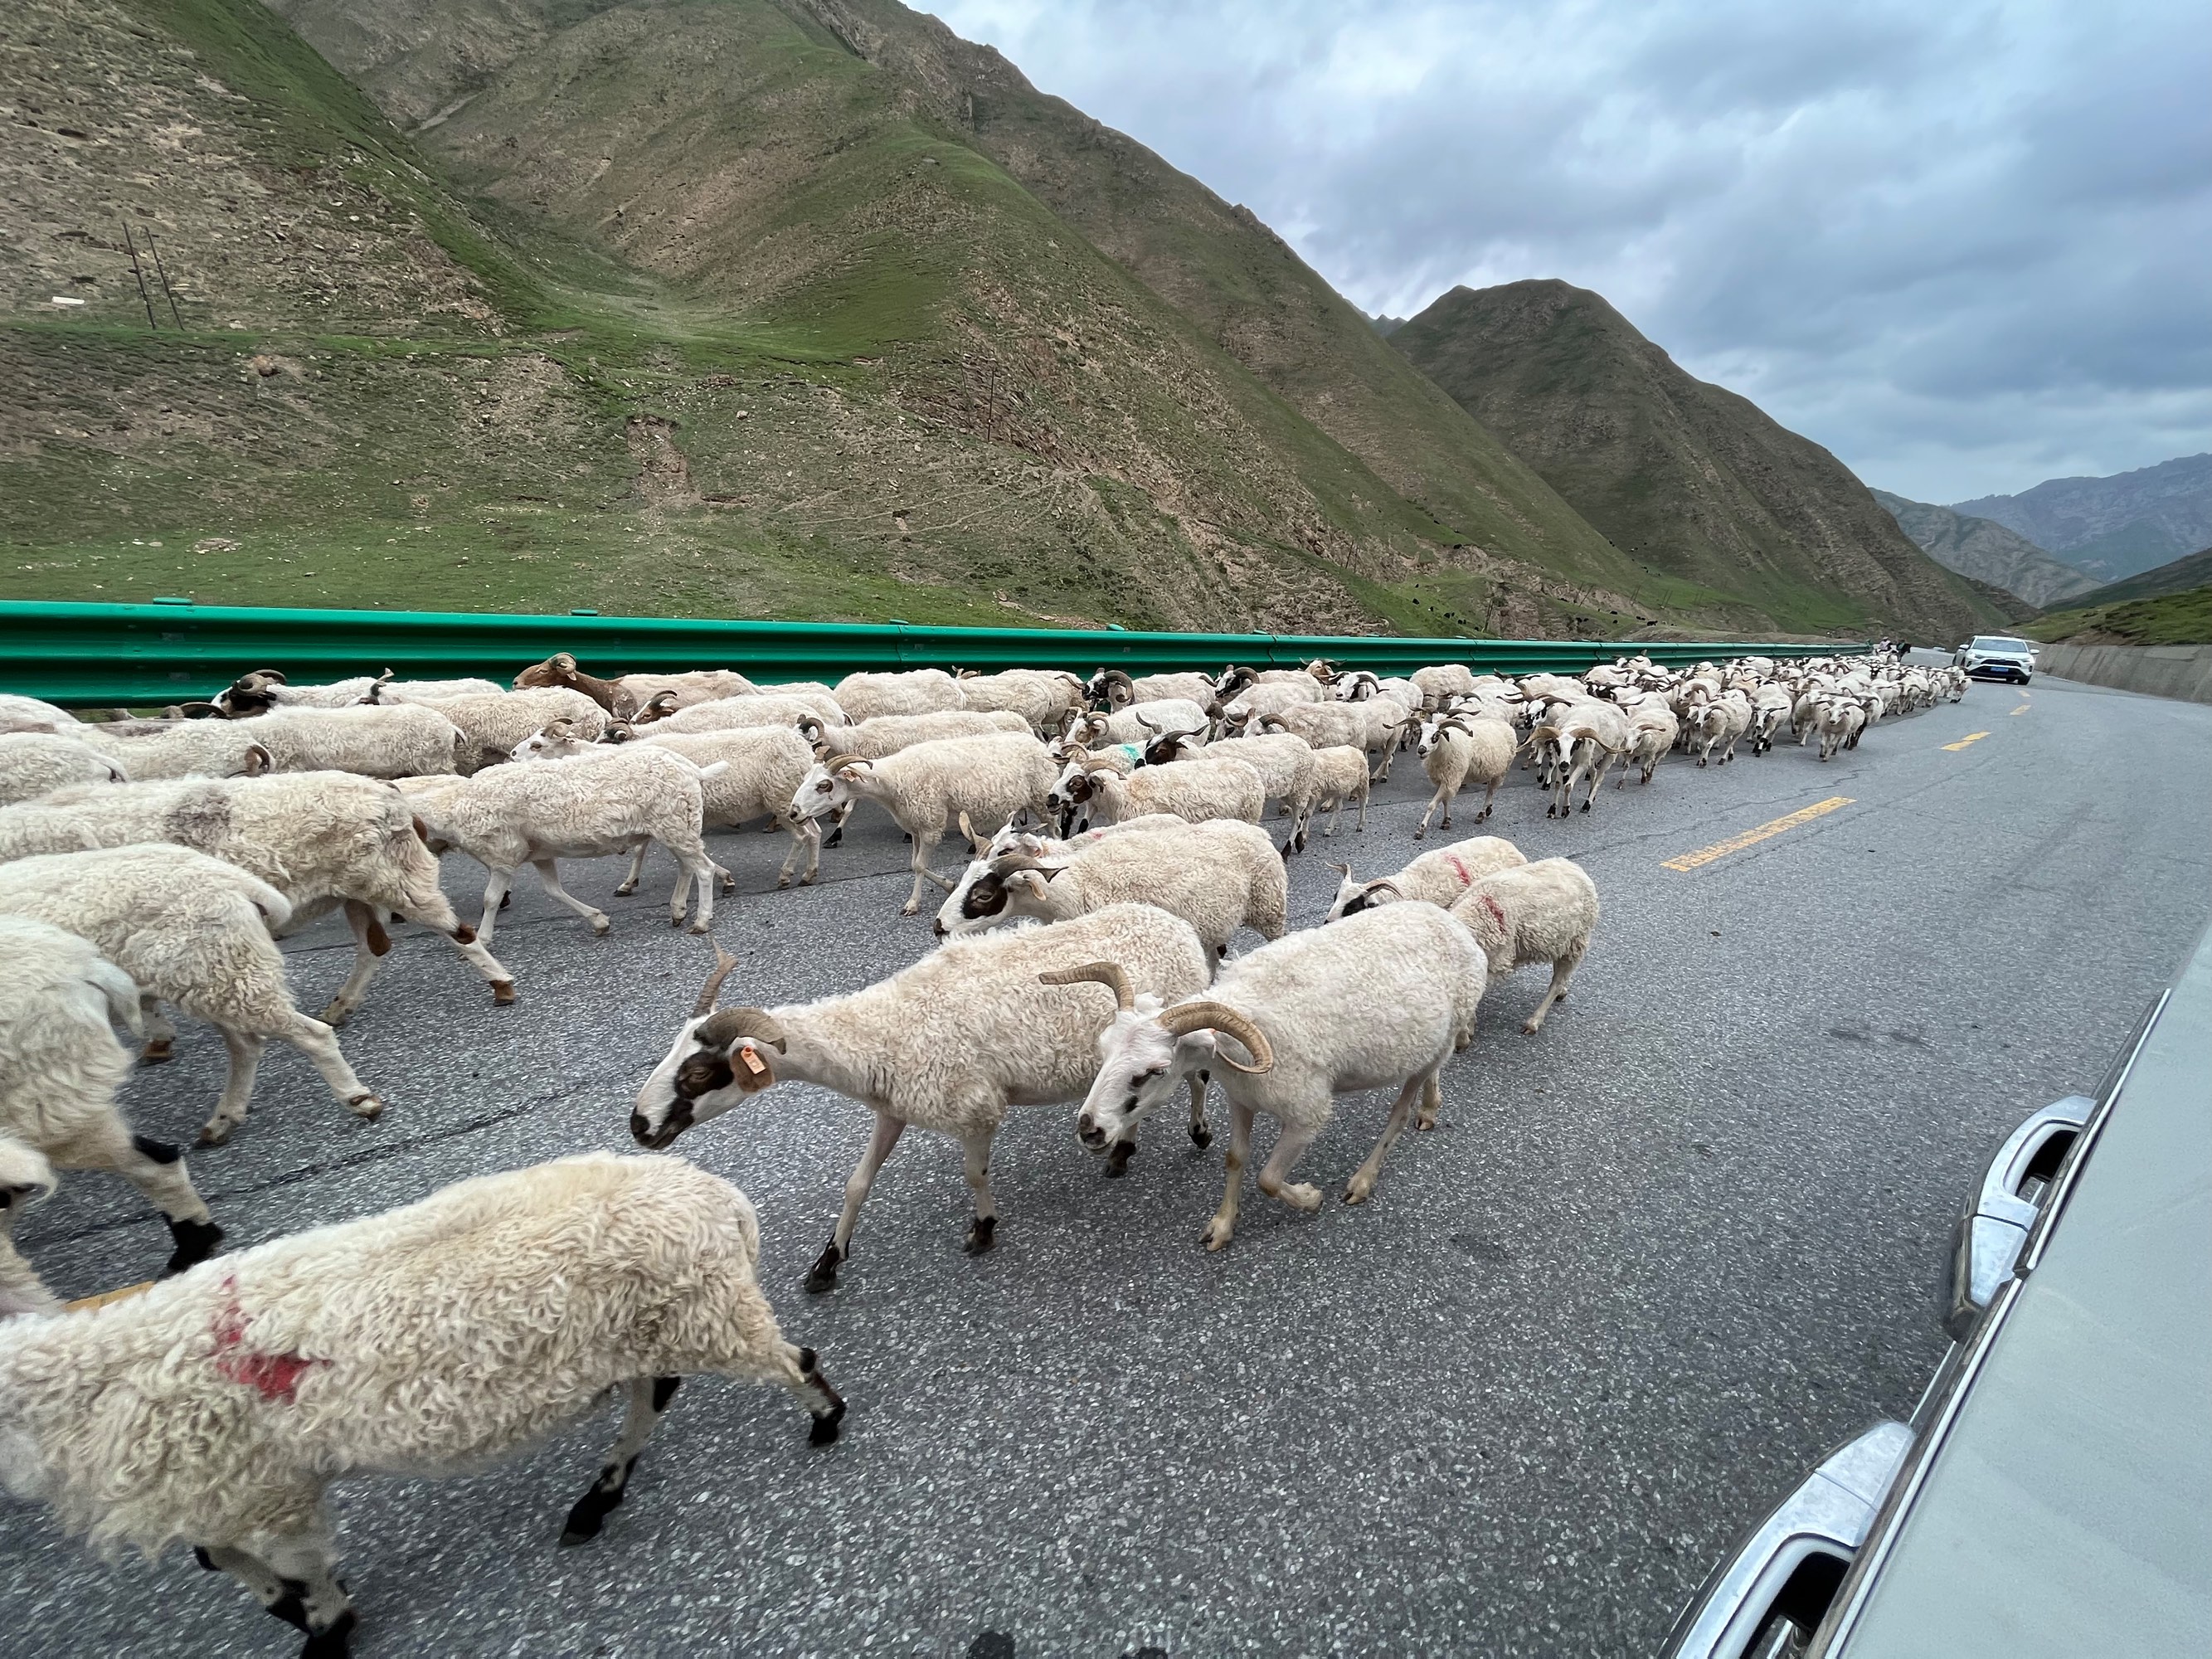 Flocks of sheep on the highway